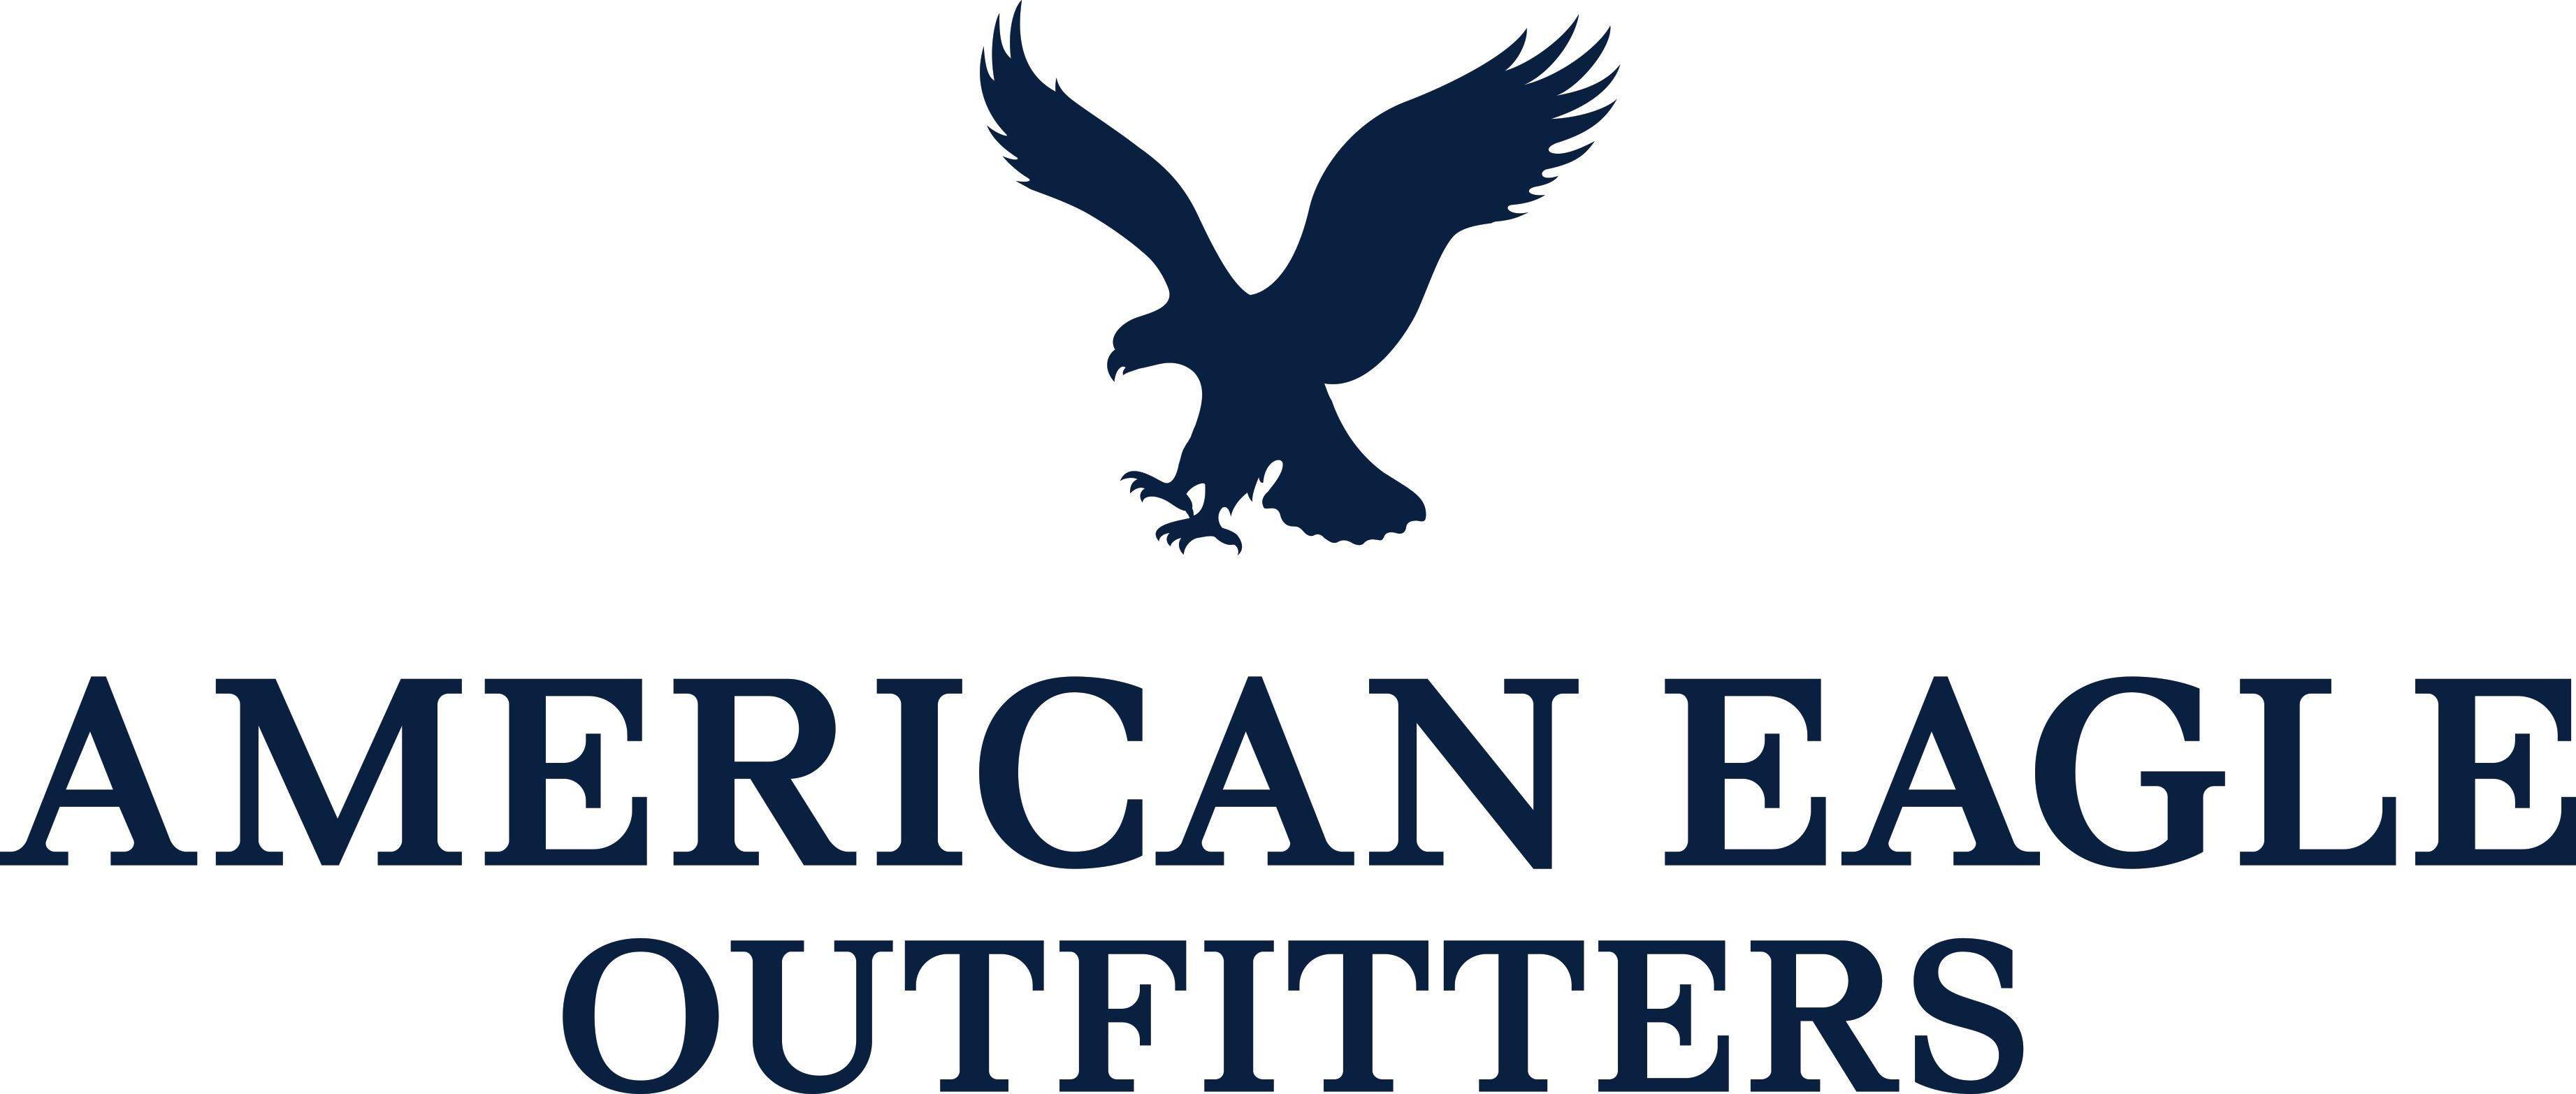 American Eagle Outfitters Logo - American Eagle Outfitters Near 5 Year Highs; Some Thoughts